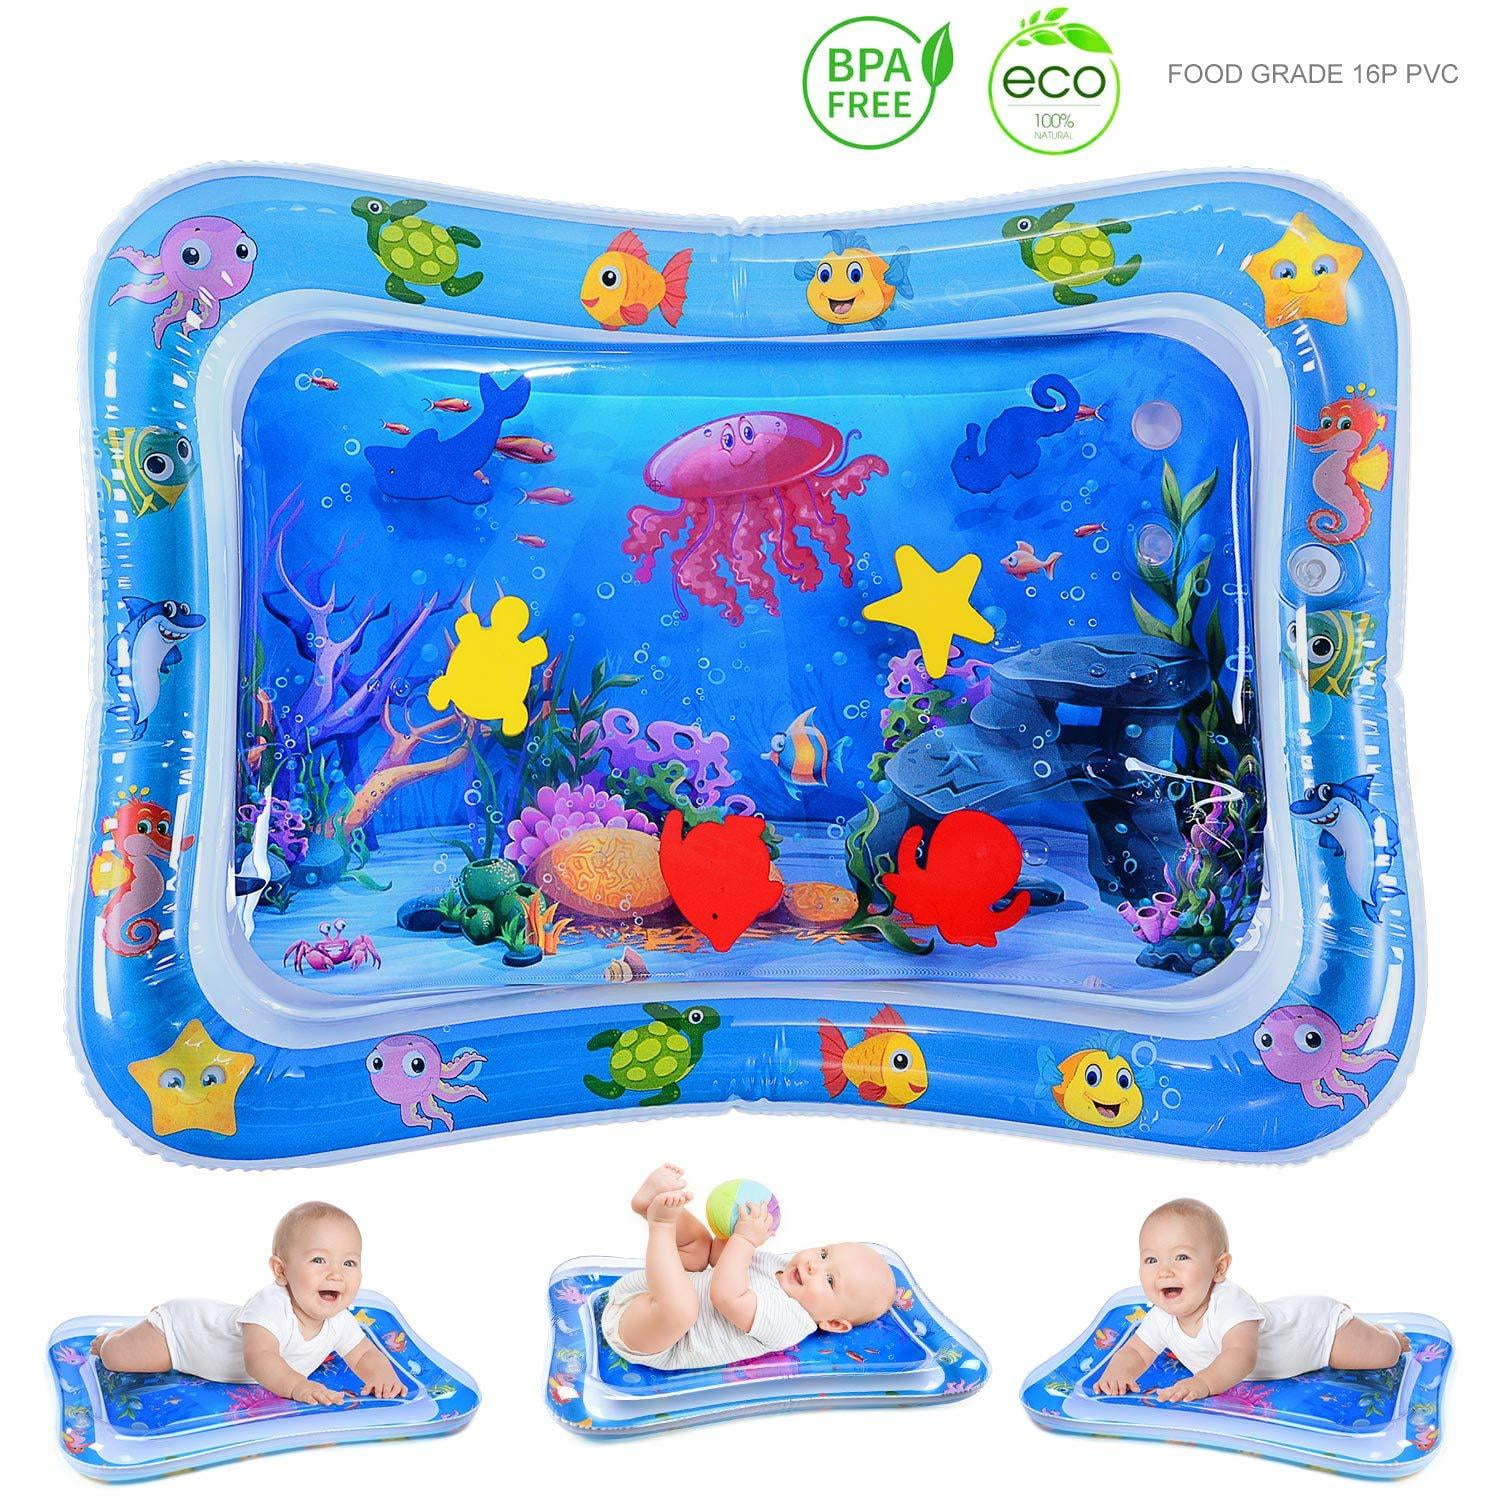 Wallfire Baby Inflatable Water Mat Infants Toddlers Tummy Time Play Mat Toy for 3 6 9 Months Newborn Boy Girl Blue, 110cm/42inch 